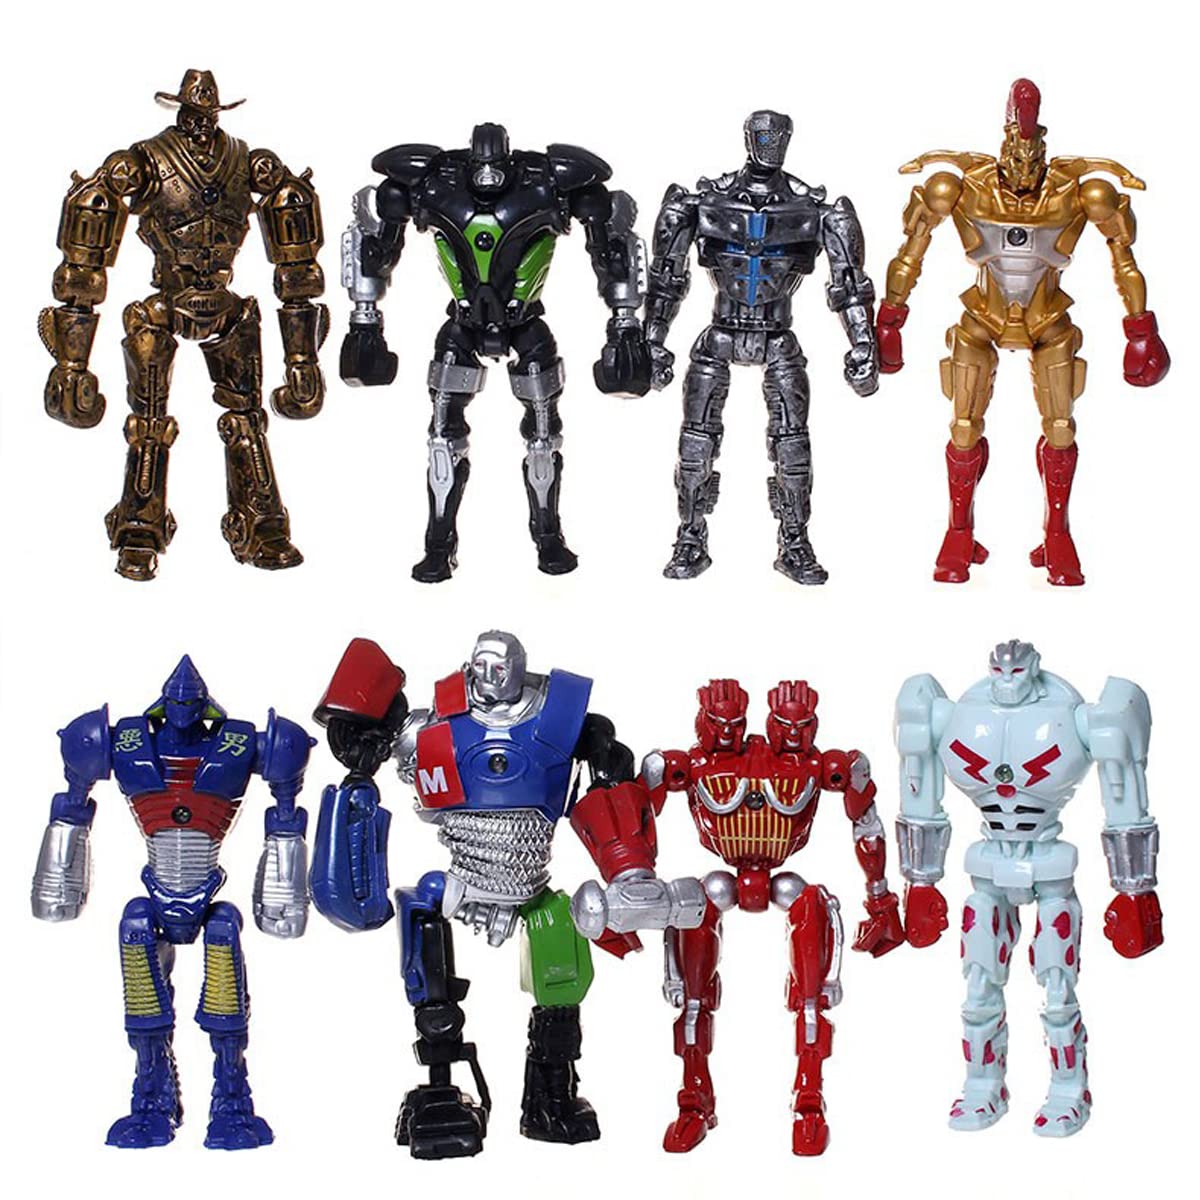 MC TTL 8 Pcs Real Steel Cake Topper, PVC Real Steel Toys Mini Figures Toy, Dessert Table Decorations for Home Office Collectible Decoration Ornaments Kids Gift.